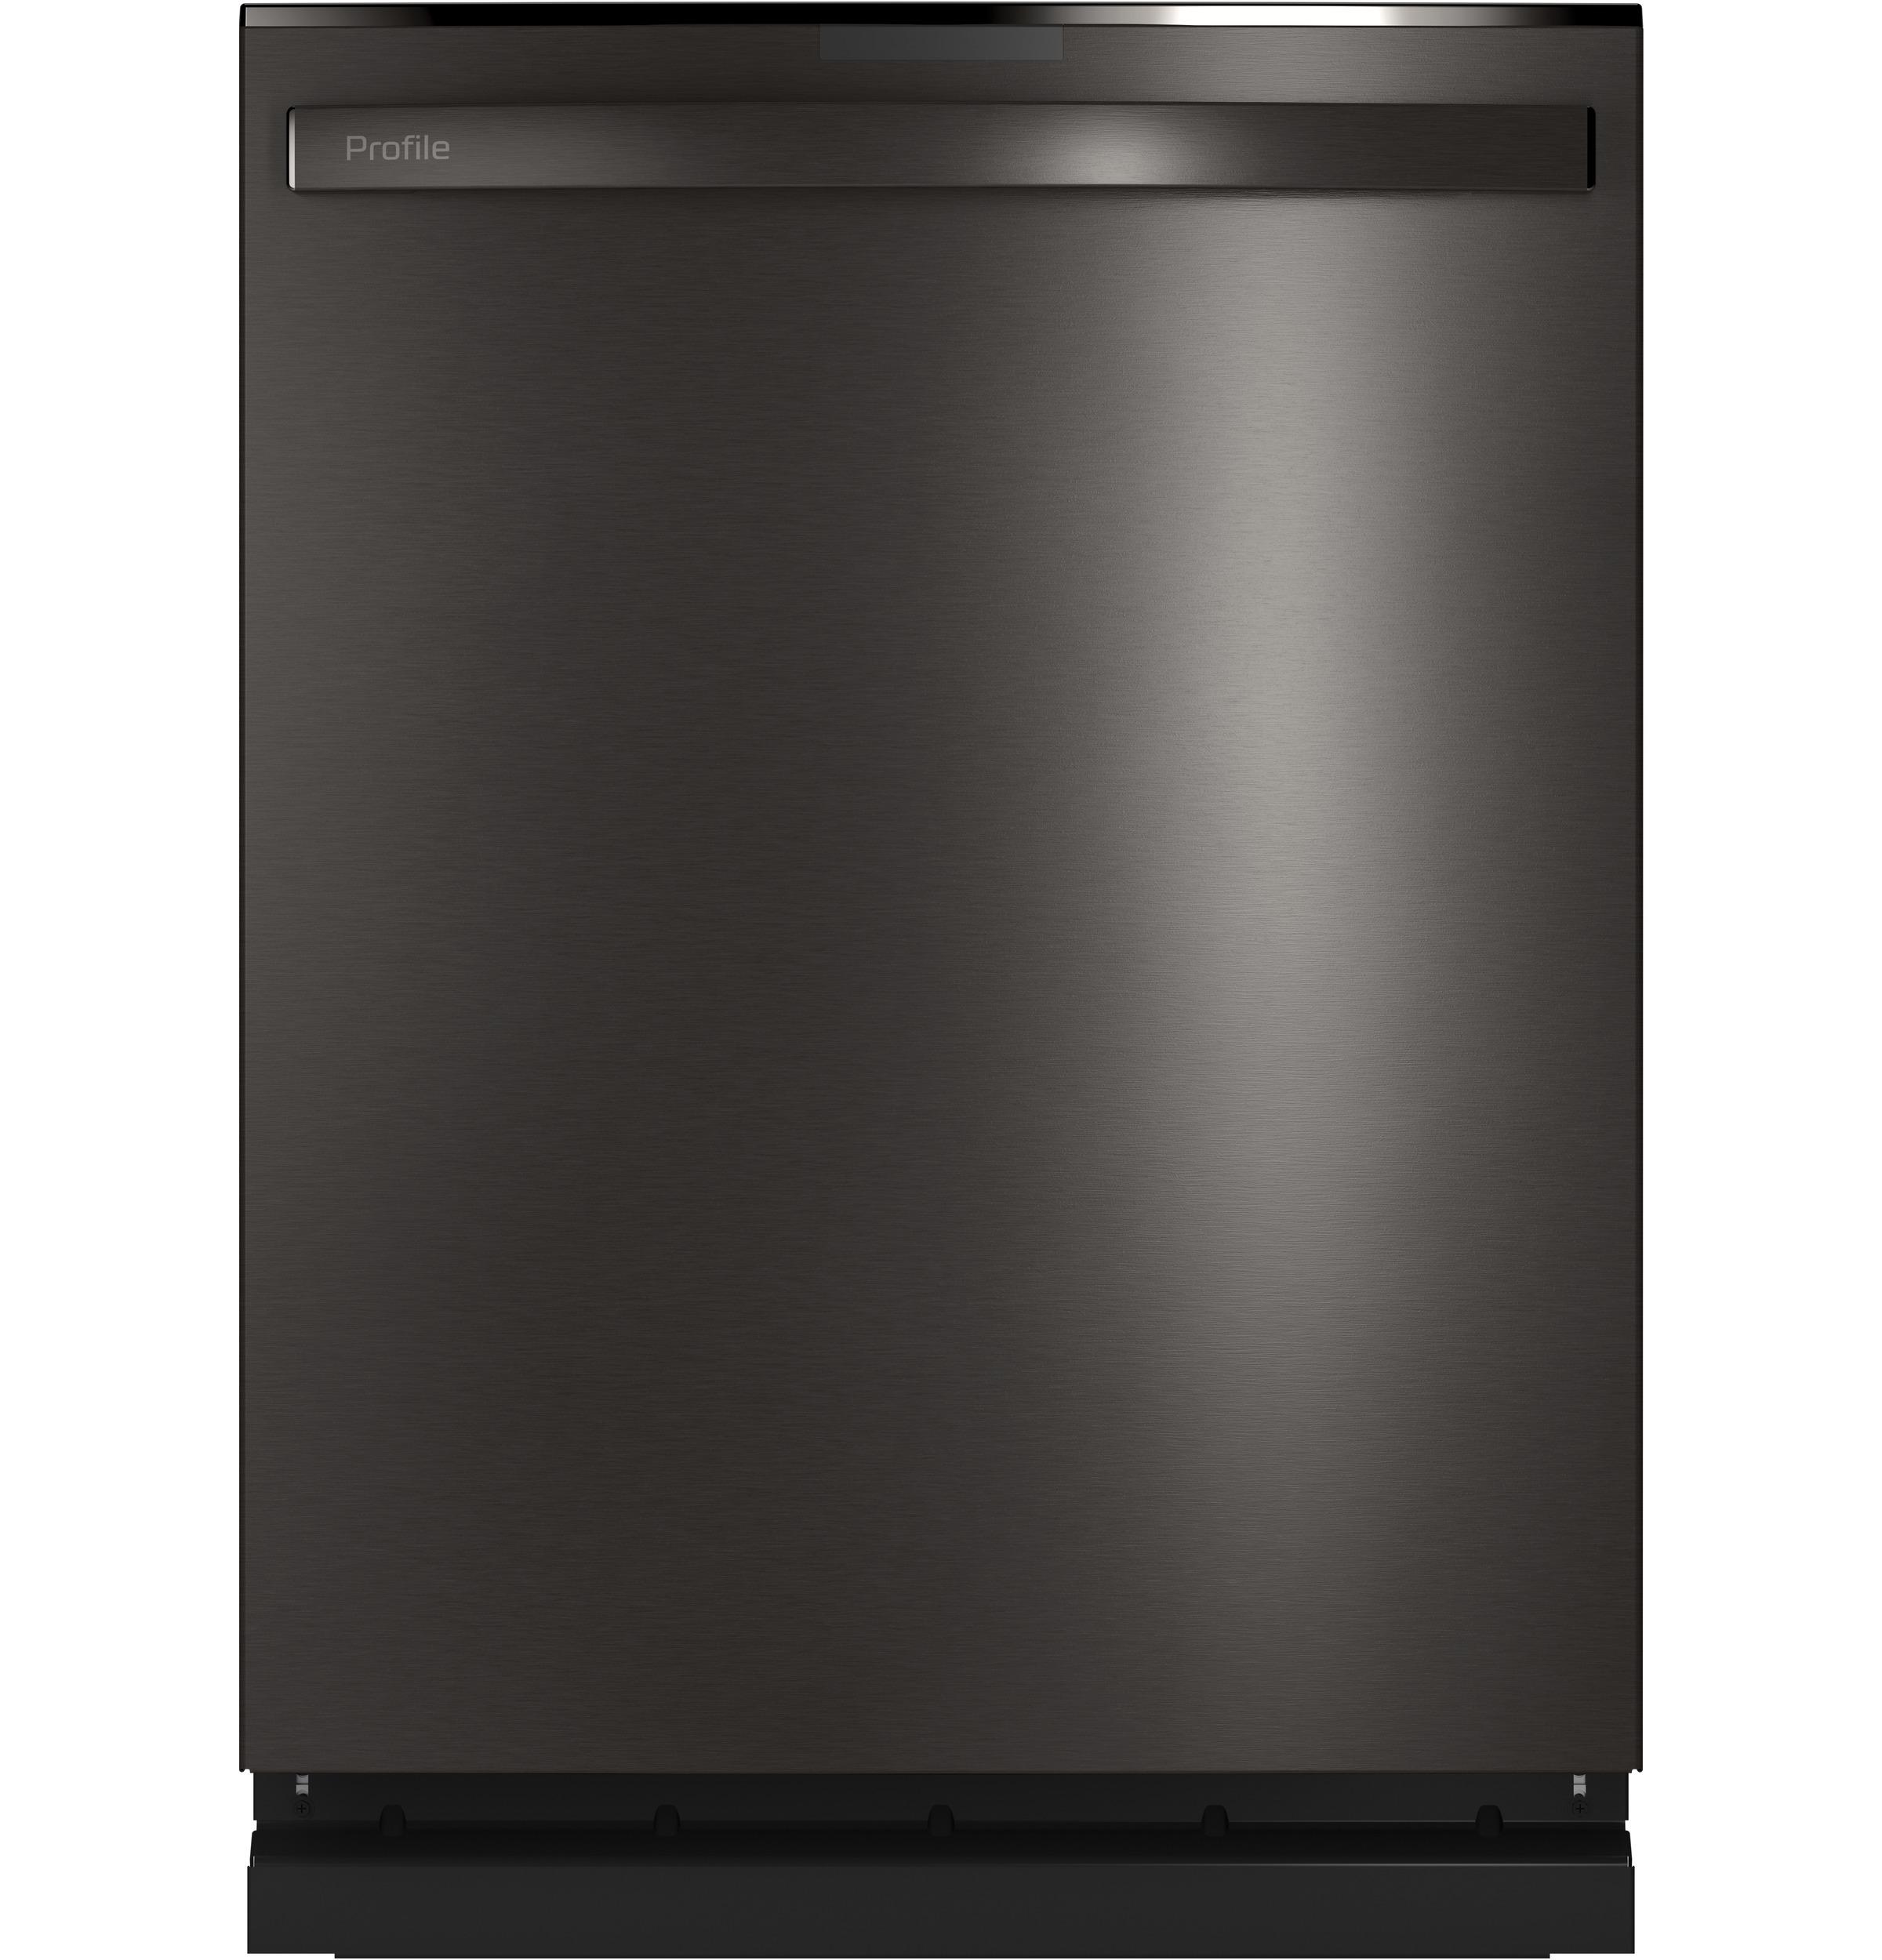 GE Profile™ ENERGY STAR® Top Control with Stainless Steel Interior Dishwasher with Sanitize Cycle & Dry Boost with Fan Assist